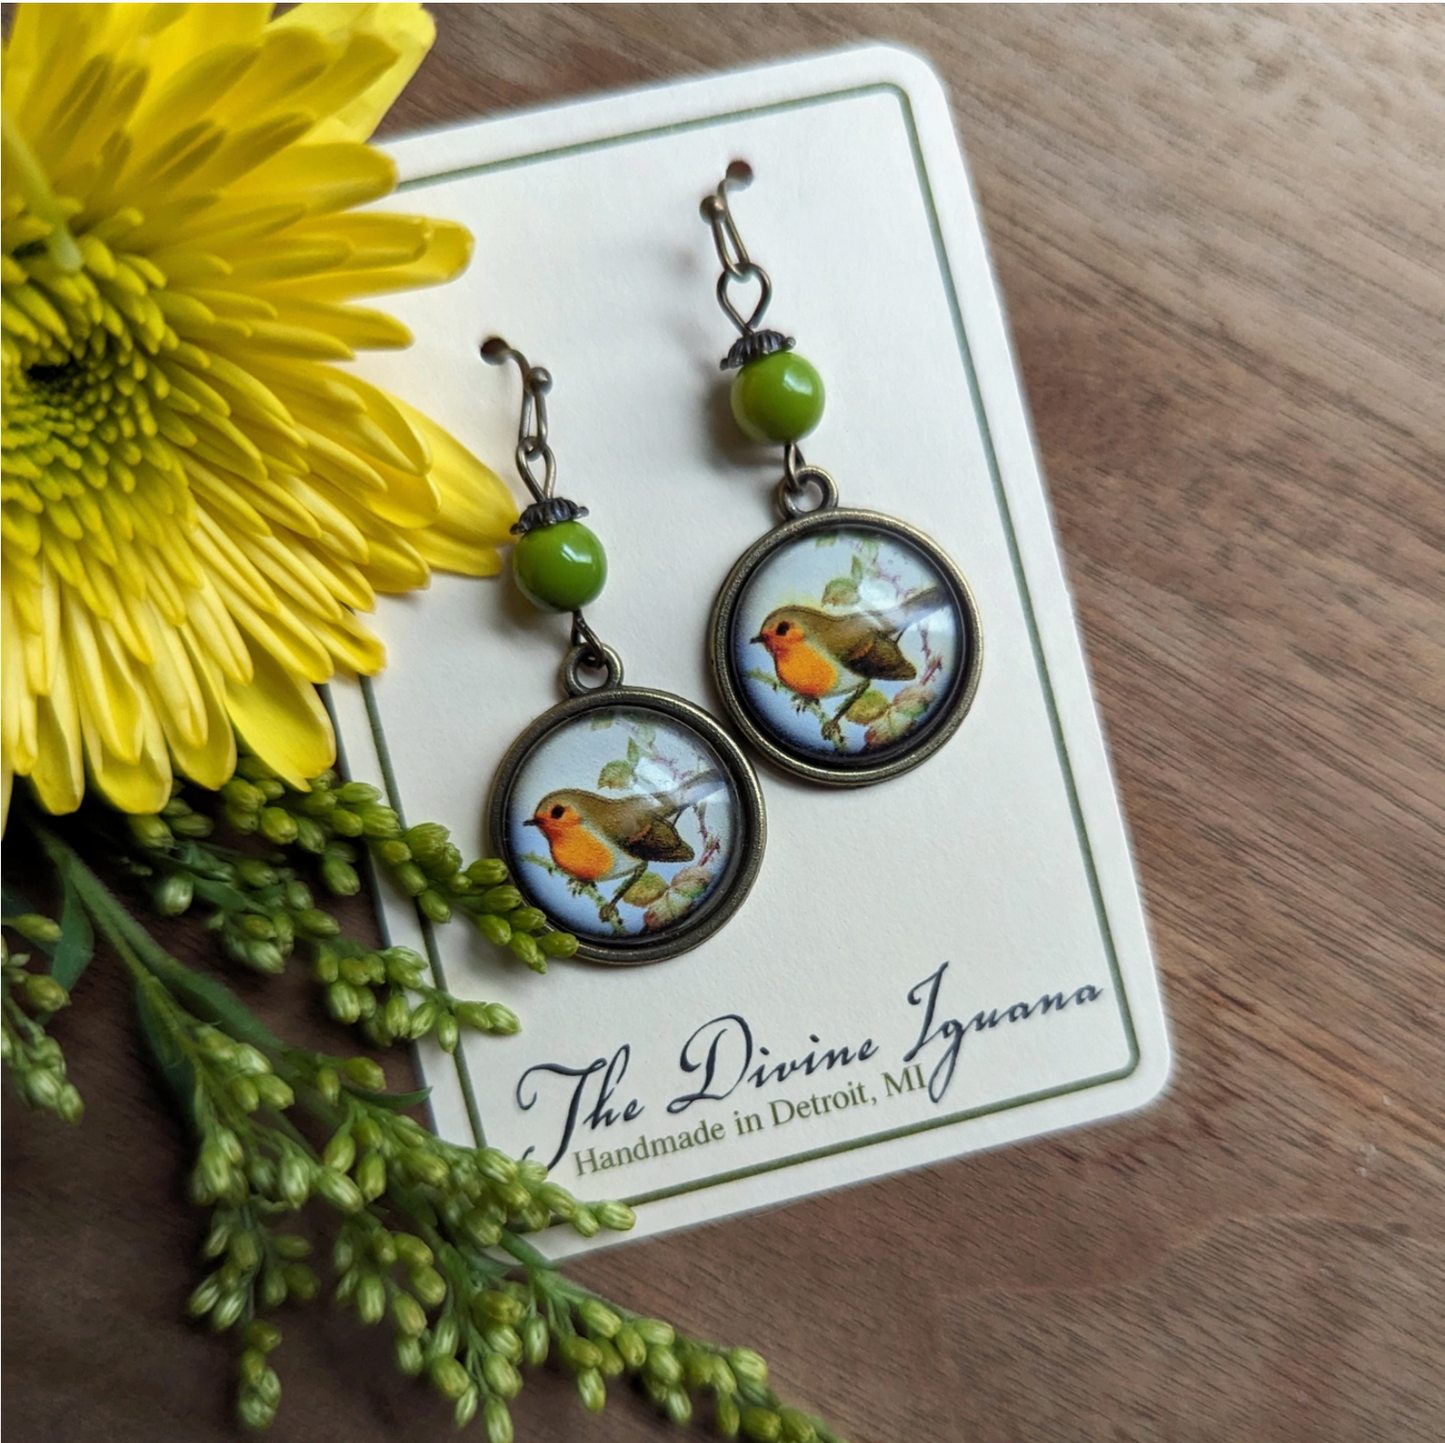 Spring Robin Bird Vintage Inspired Glass Cabochon Earrings